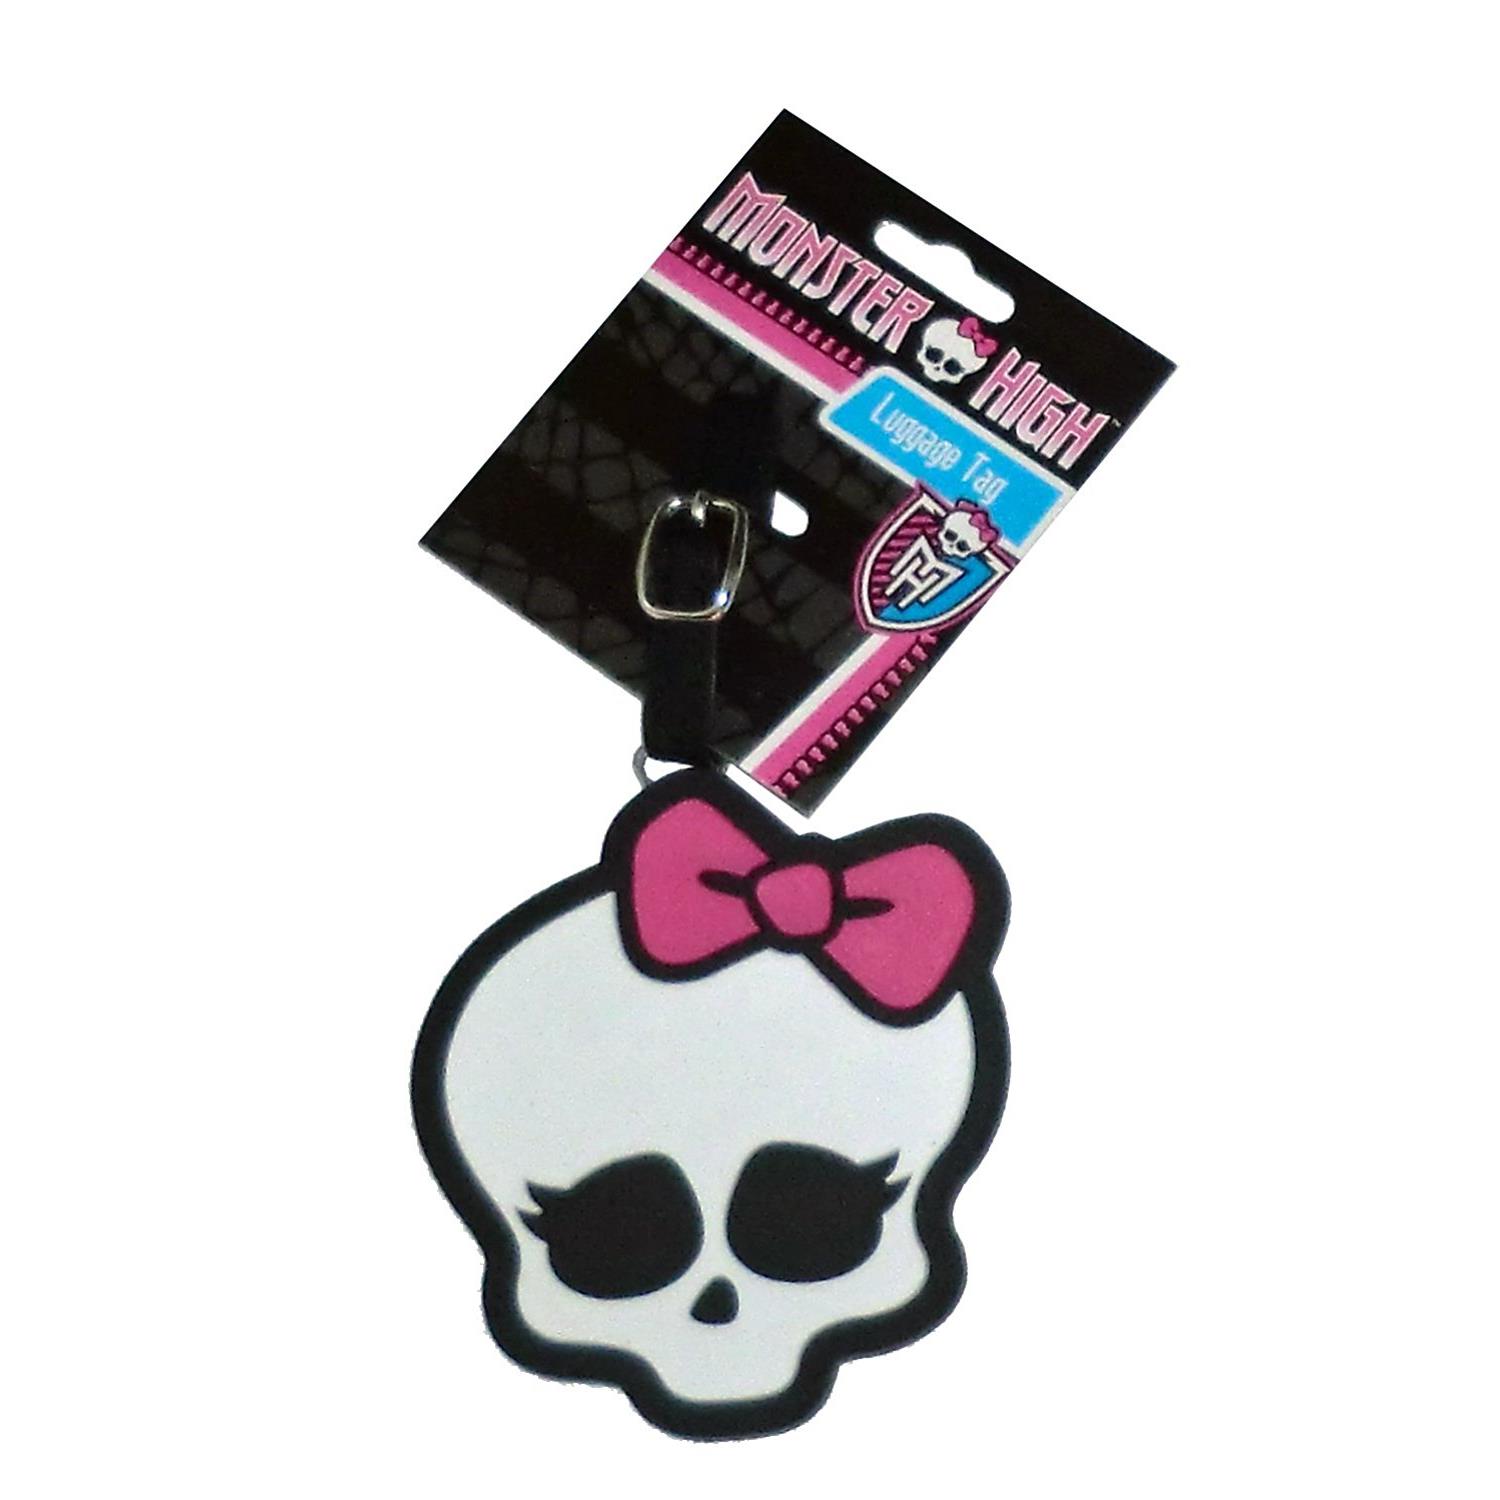 Monster High Classic Designed Cute Skullette Adjustable Strap Exclusive Eye Catching Luggage I.D. Tag